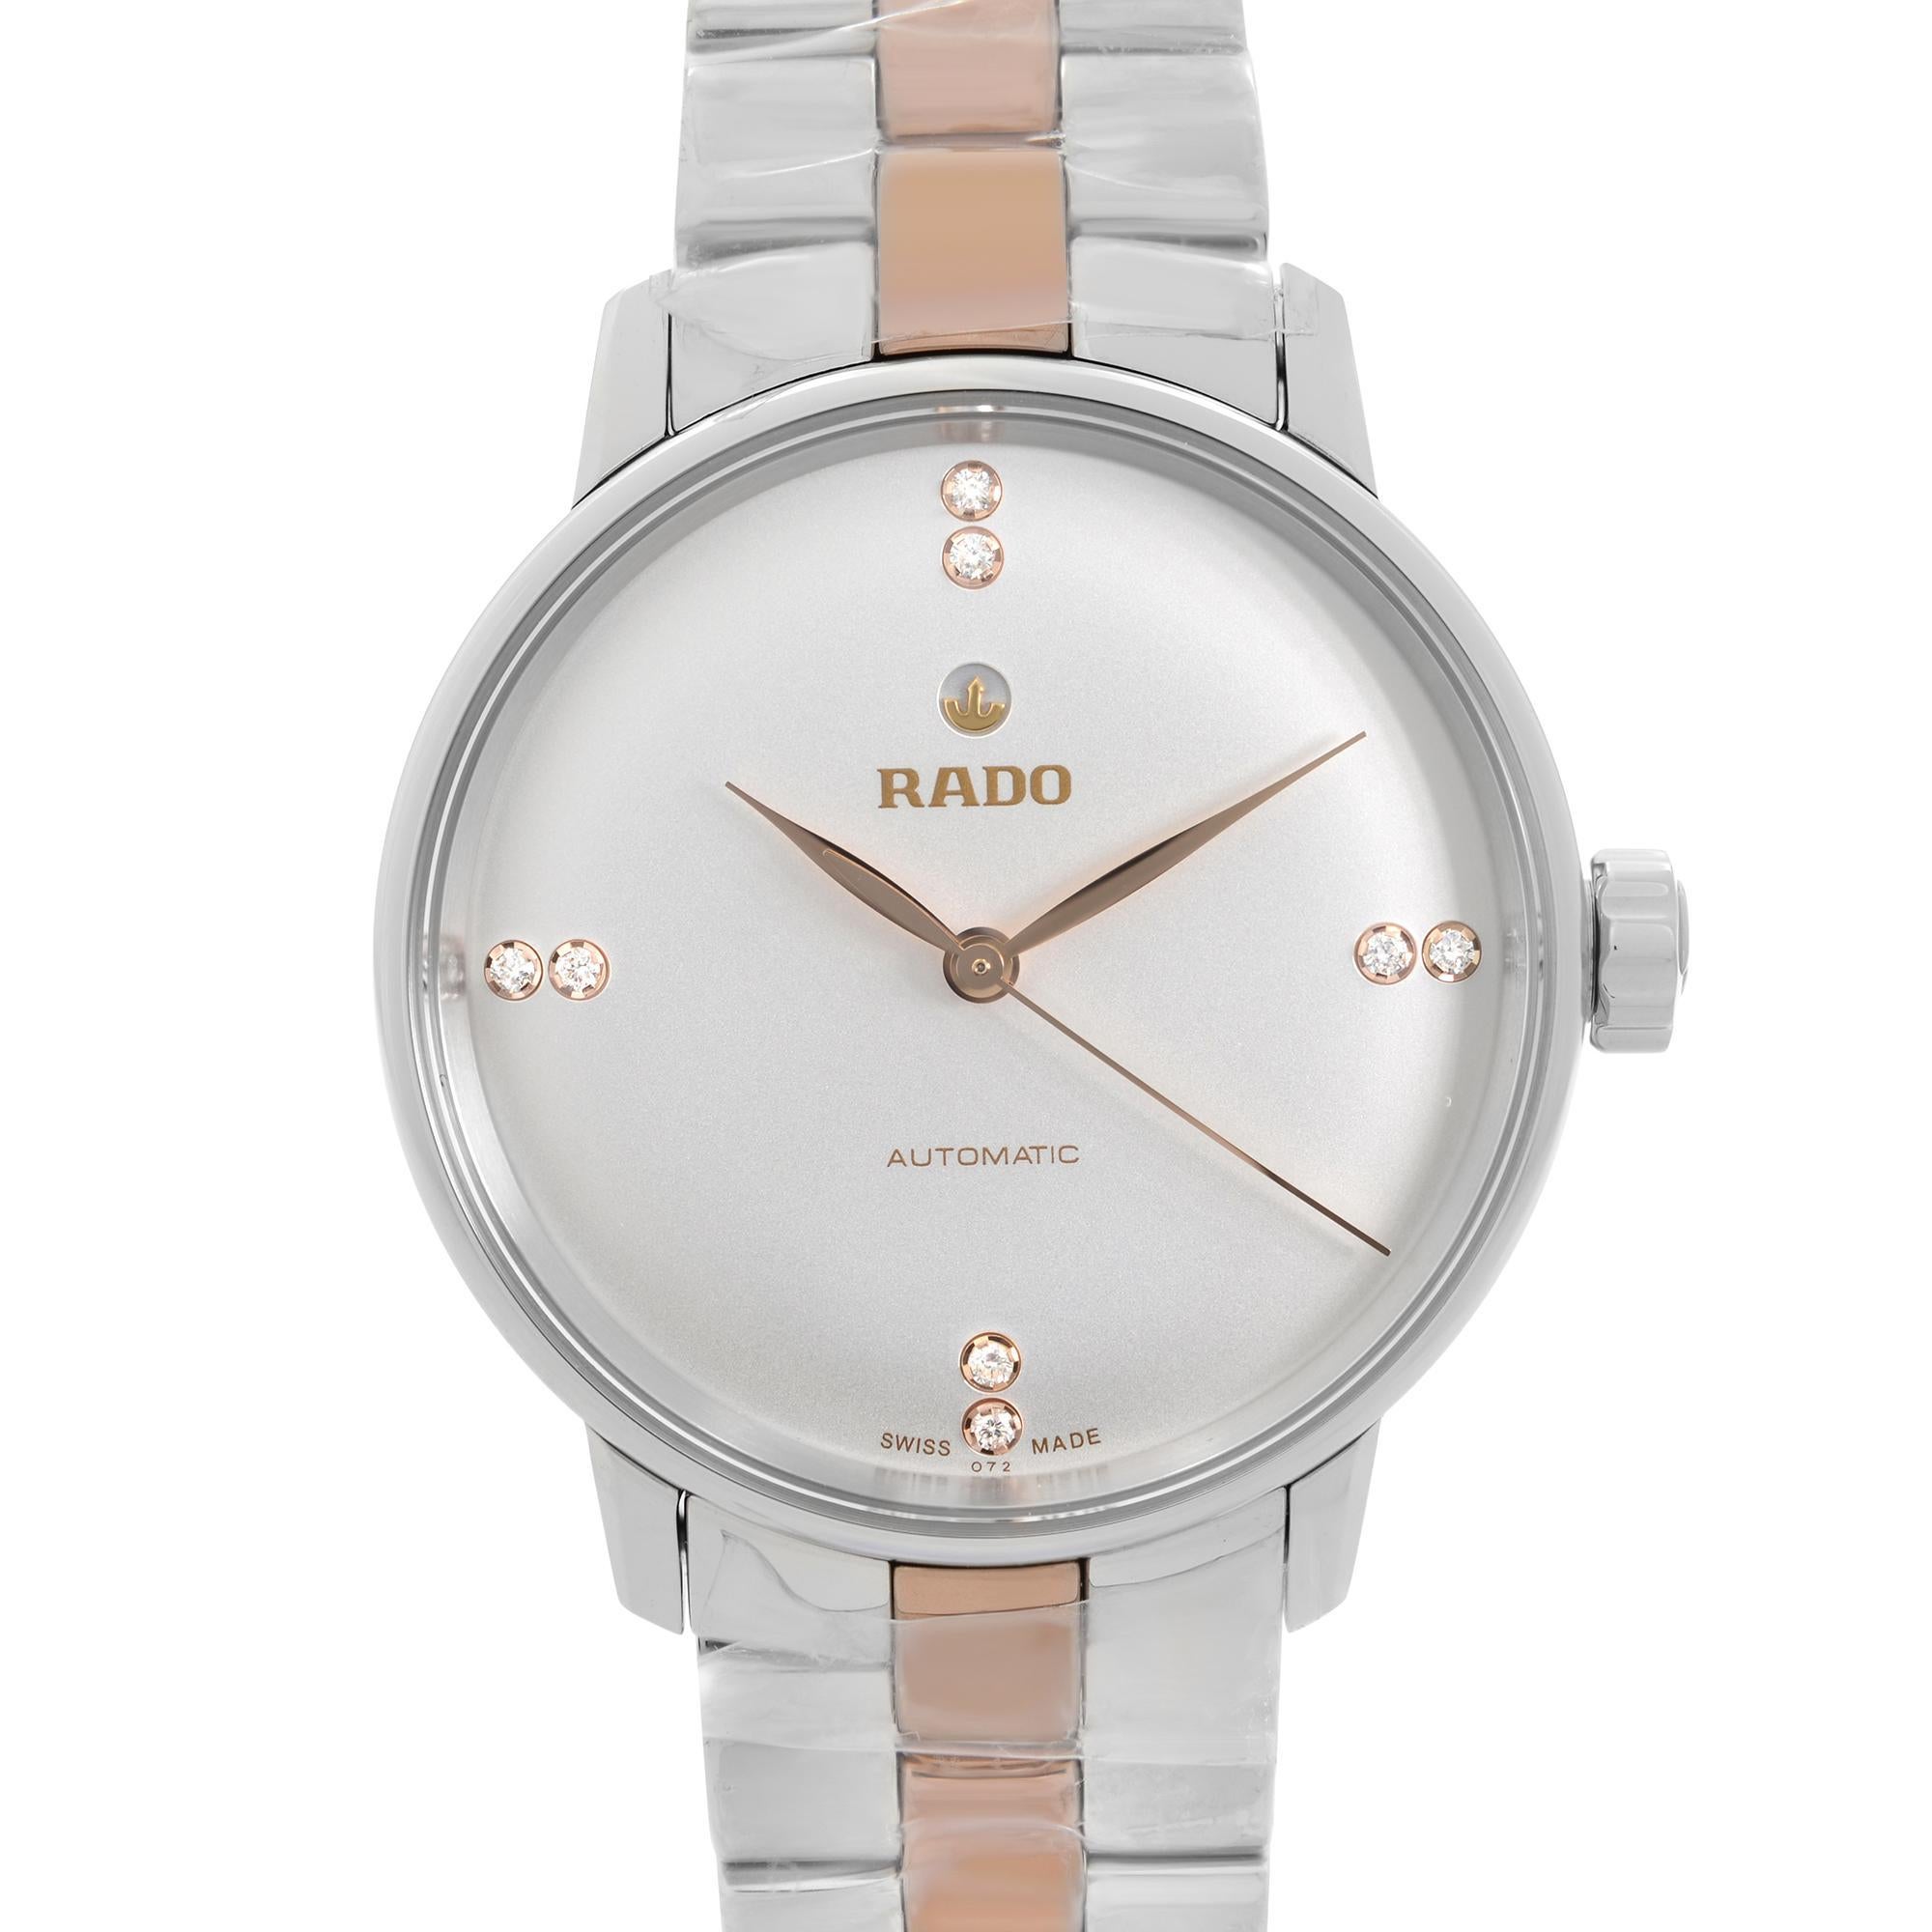 Unworn Rado Coupole Classic Steel Ceramic White Diamond Dial Ladies Watch R22862722. This Beautiful Ladies Timepiece is Powered By a Mechanical (Automatic) Movement and Features: Stainless Steel Case with a Two-Tone Stainless Steel and Ceramic